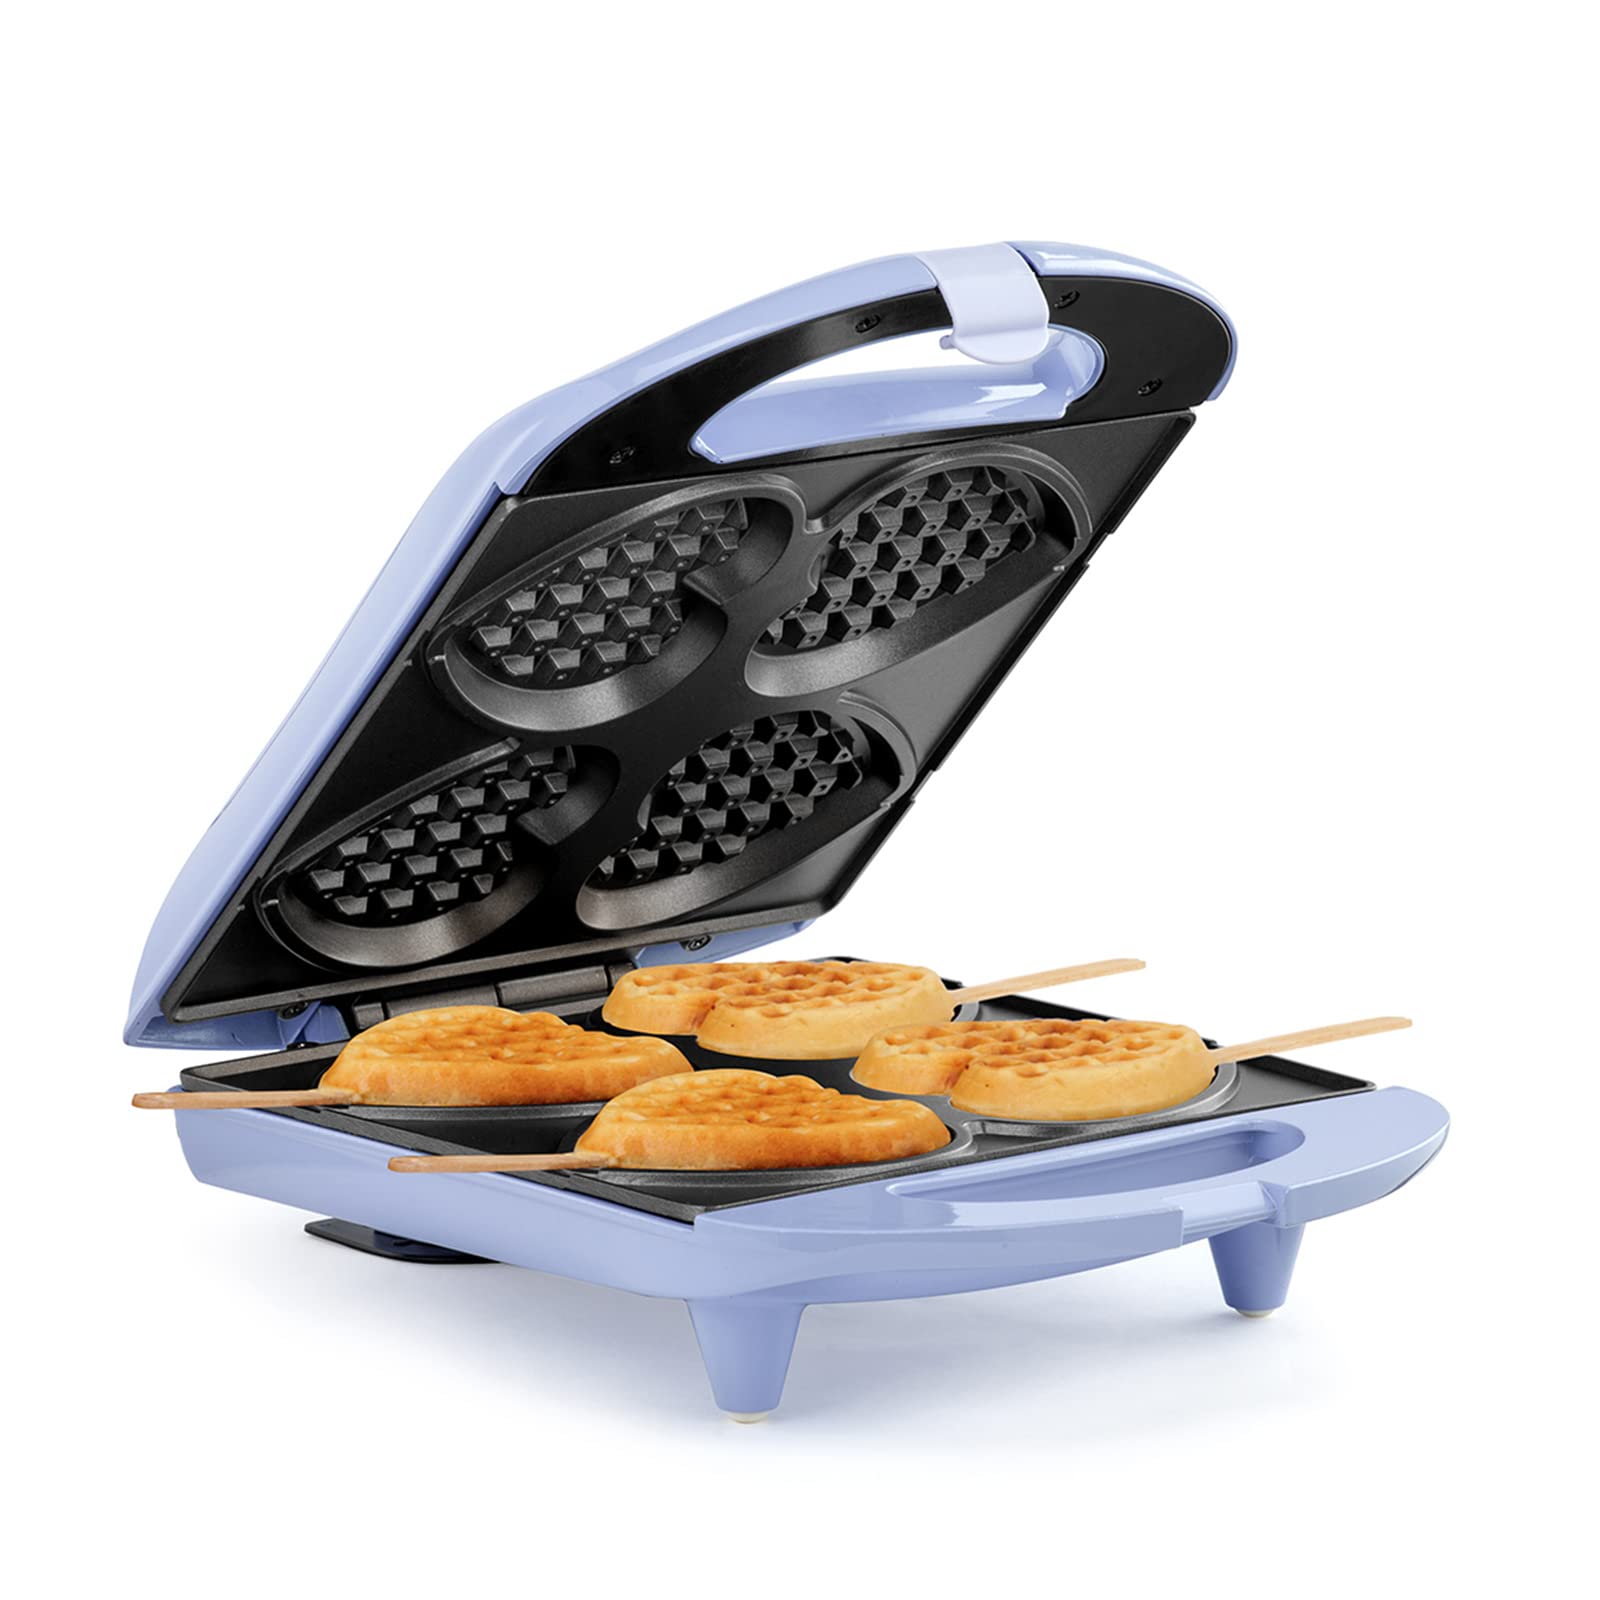 Holstein Housewares - Non-Stick Heart Waffle Maker, Lavender - Makes 4 Heart-Shaped Waffles in Minutes